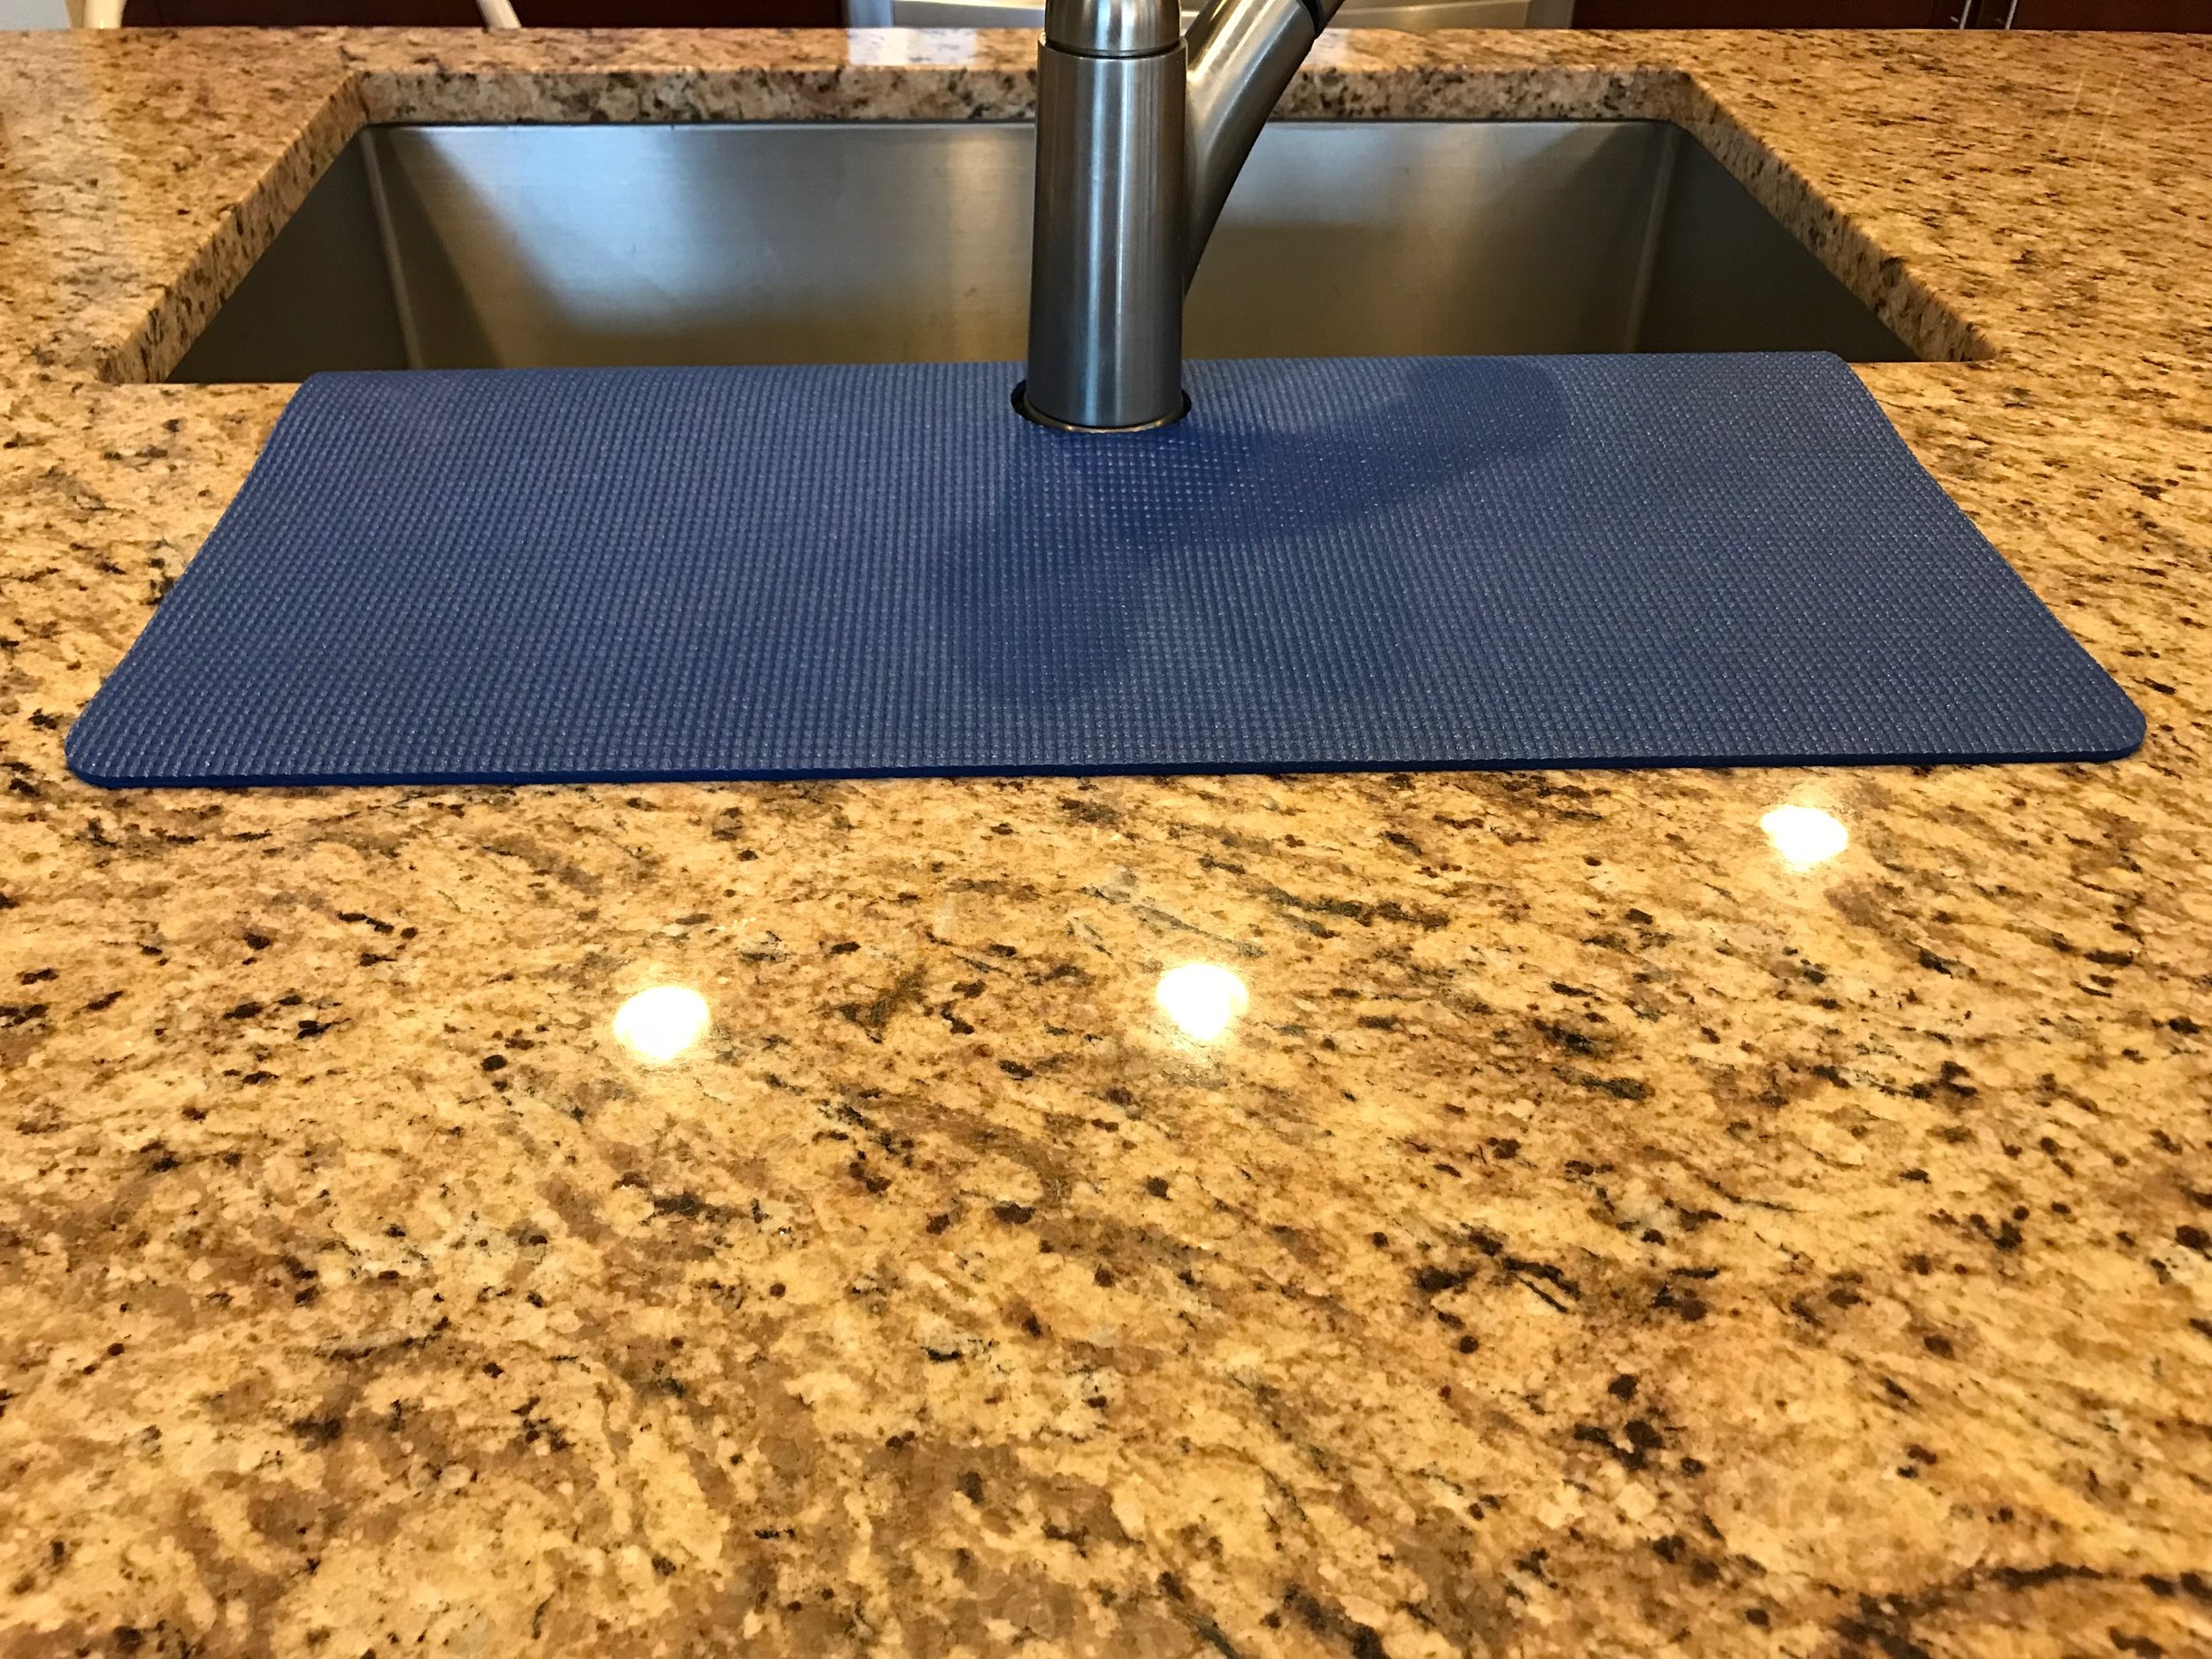 Dark Blue Kitchen Sink Faucet Splash Guard Protects From Water